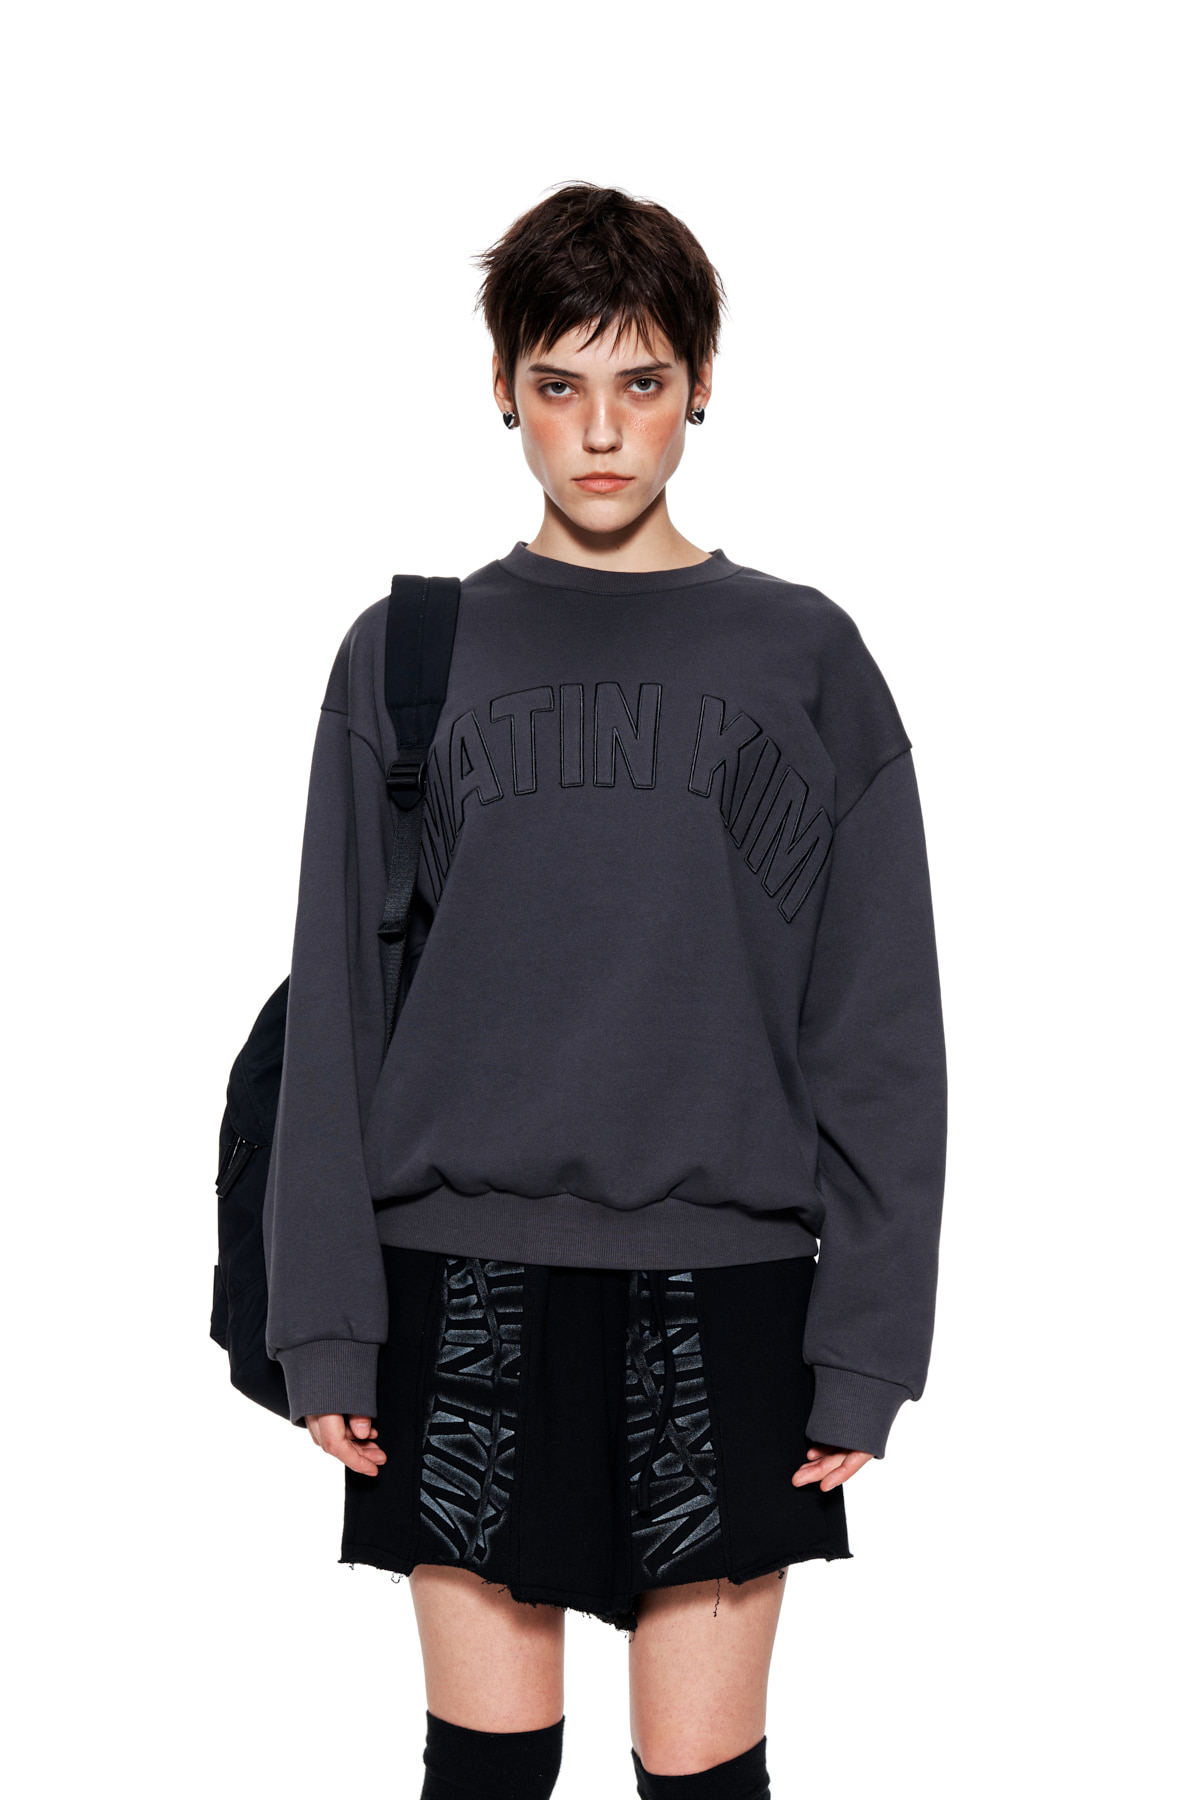 MATIN APPLIQUE ARCH SWEATSHIRT IN CHARCOAL